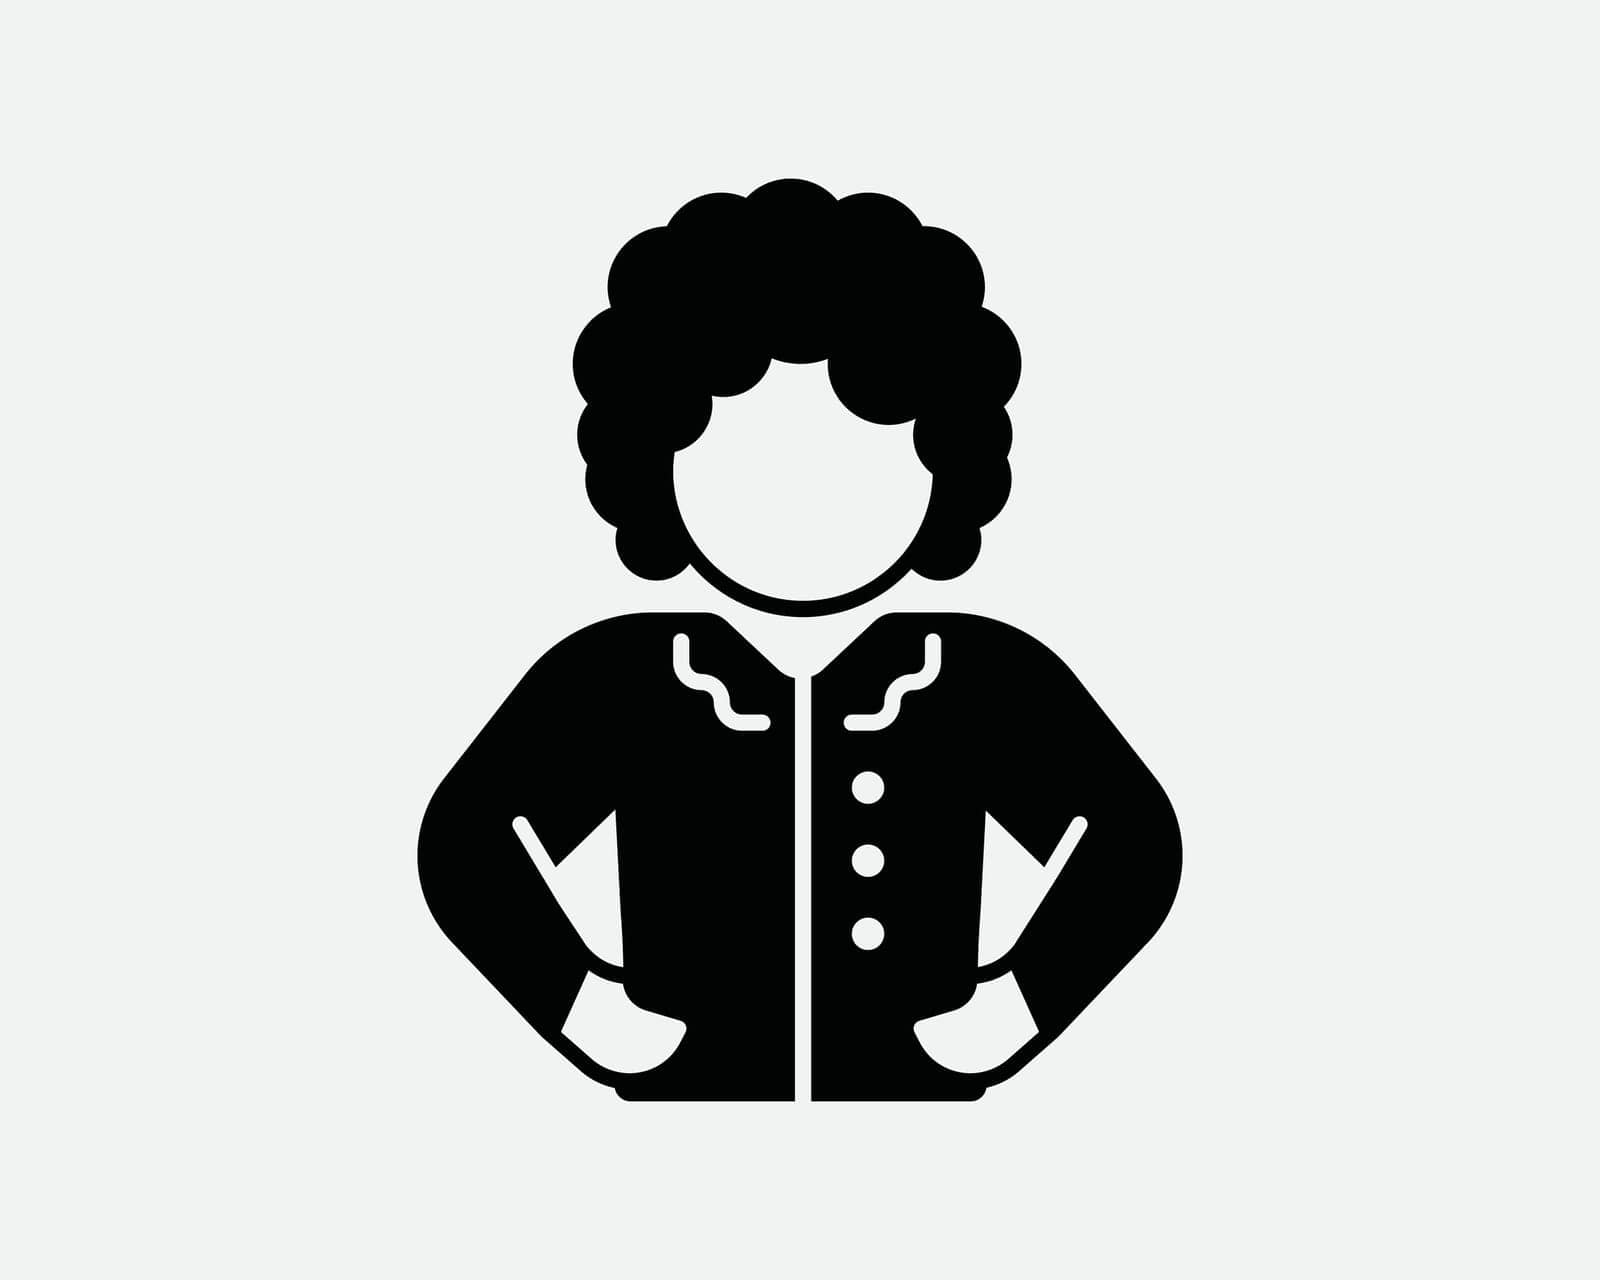 Woman CEO Icon. Girl Lady Female Manager Boss Employer Worker Employee Leader Black White Sign Symbol Illustration Artwork Graphic Clipart EPS Vector